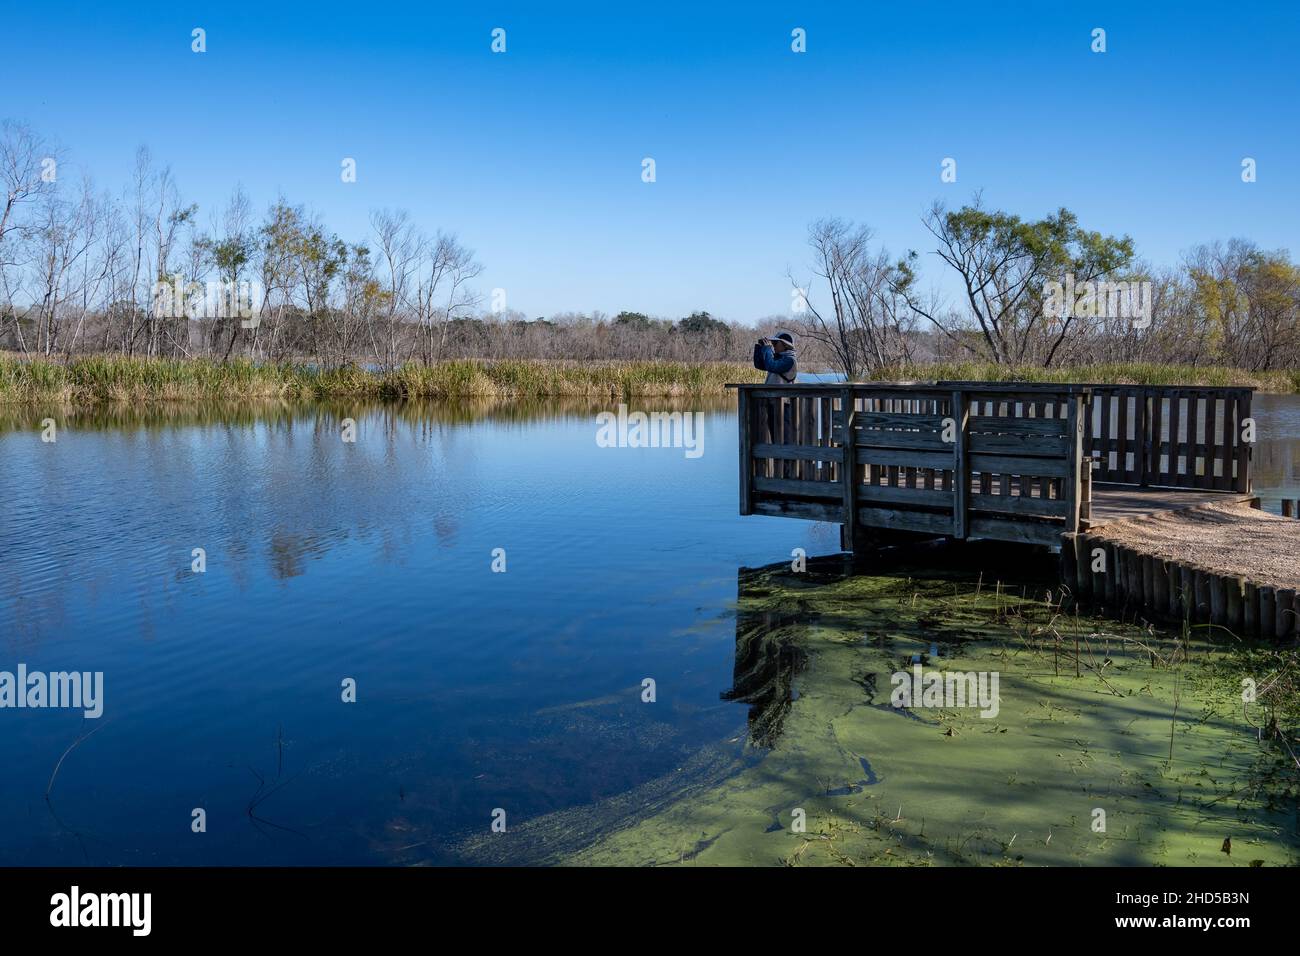 A bird watcher searching for bird on a wooden deck by the lake. Brazos Bend State Park. Needville, Texas, USA. Stock Photo